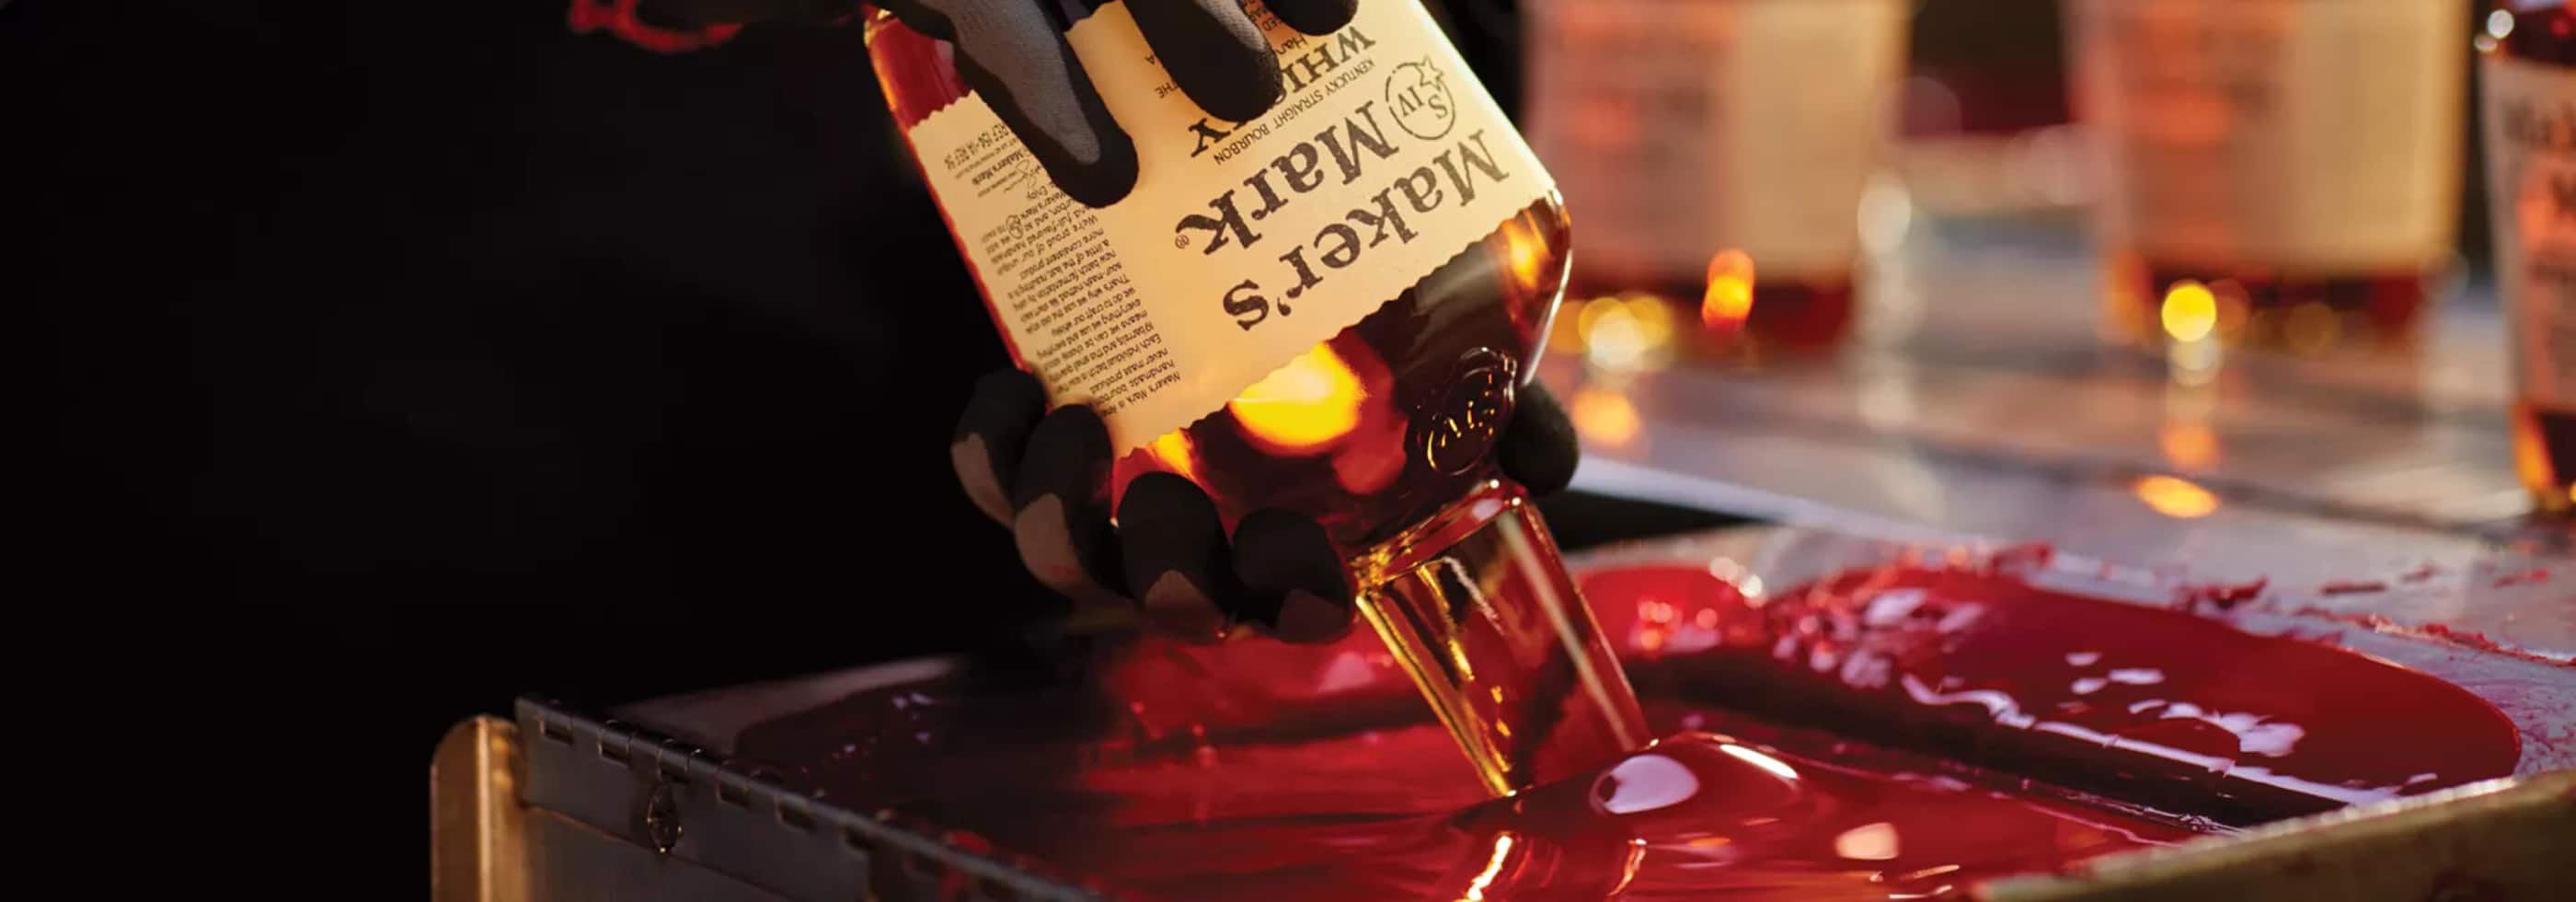 A bottle of Maker's Mark is dipped into a vat of the iconic red wax that seals the bottle